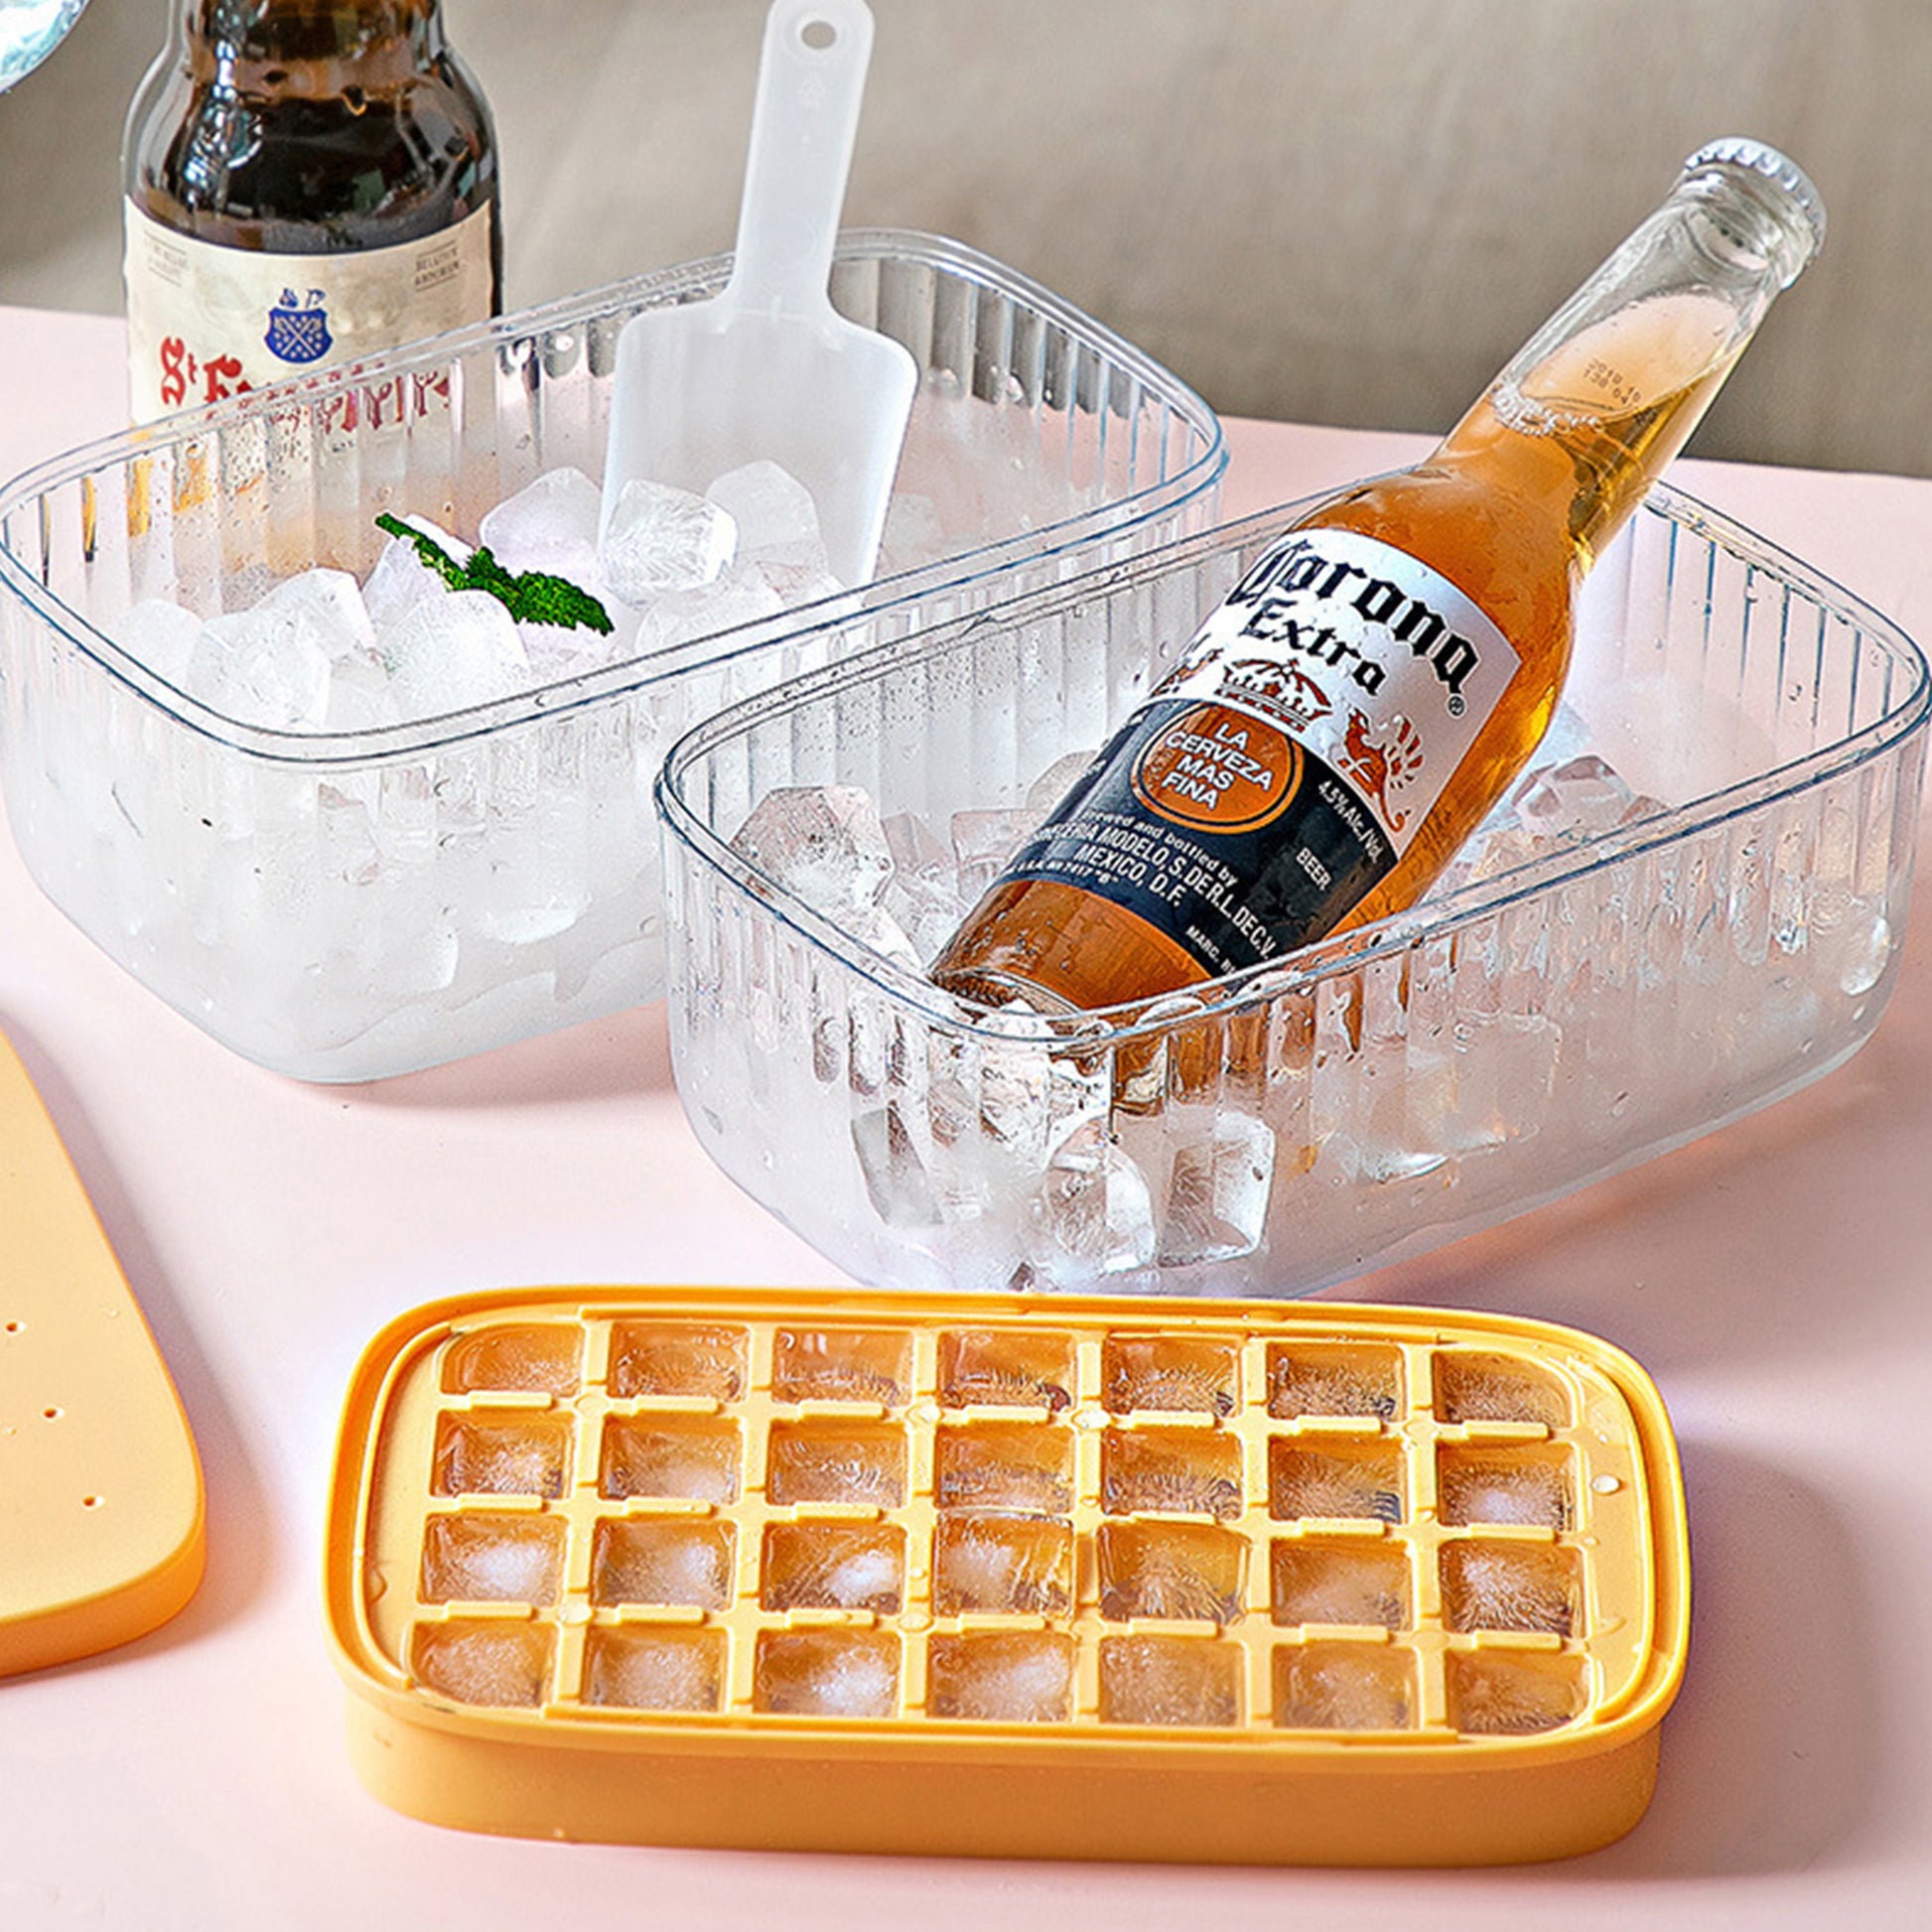 Large Silicone Ice Bucket, Ice Maker Bucket, (2 in 1) Ice Cube Maker,  Silicone Bucket with Lid, Ice Cube Mold Ice Trays 